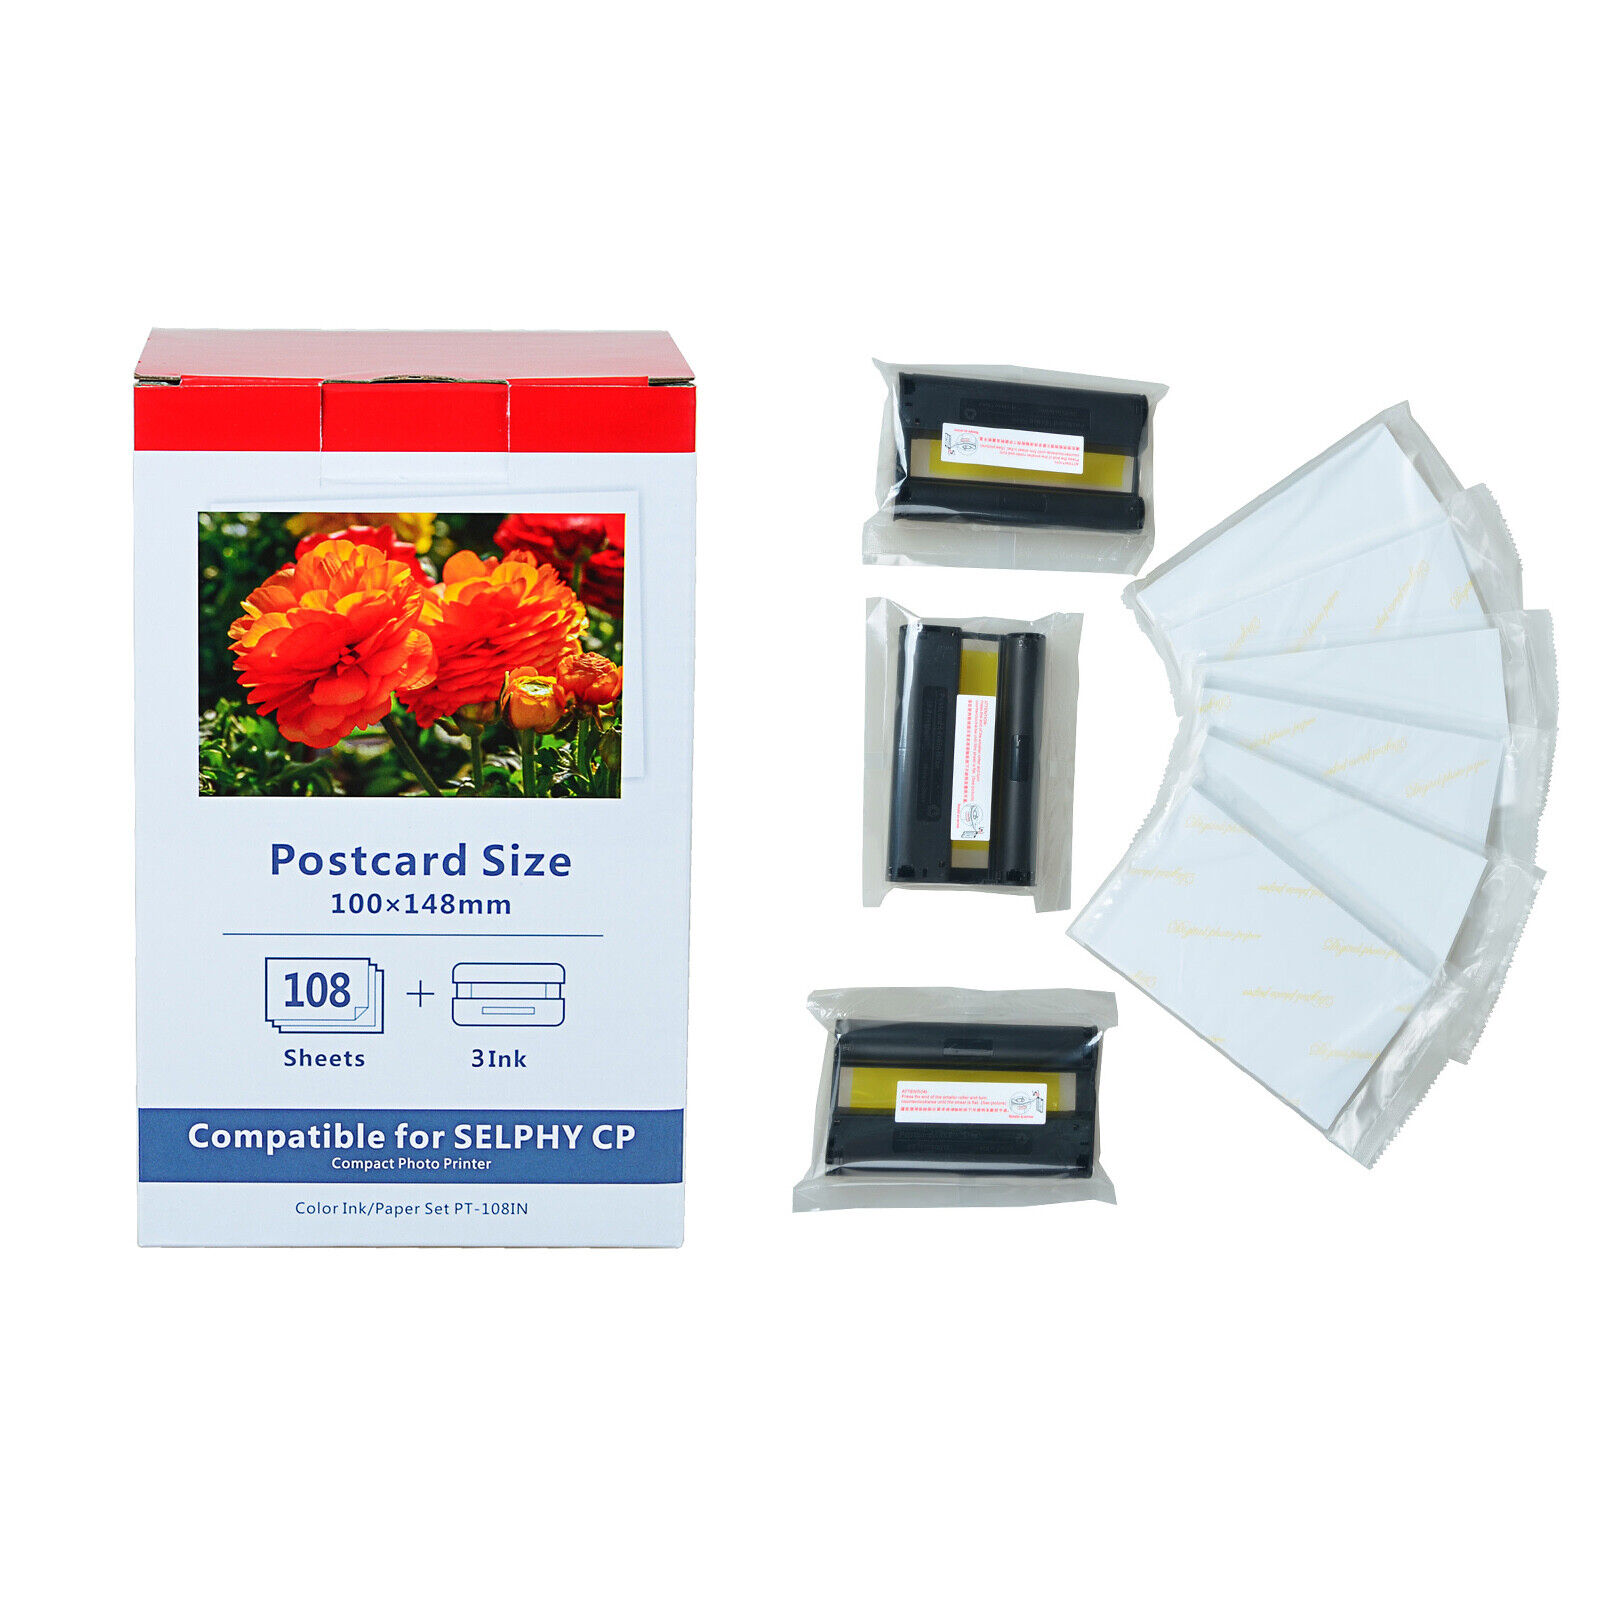 Fits Canon Selphy CP720 CP760 KP-108IN Color Inks 3115B001 + 4X6 Photo Paper Set